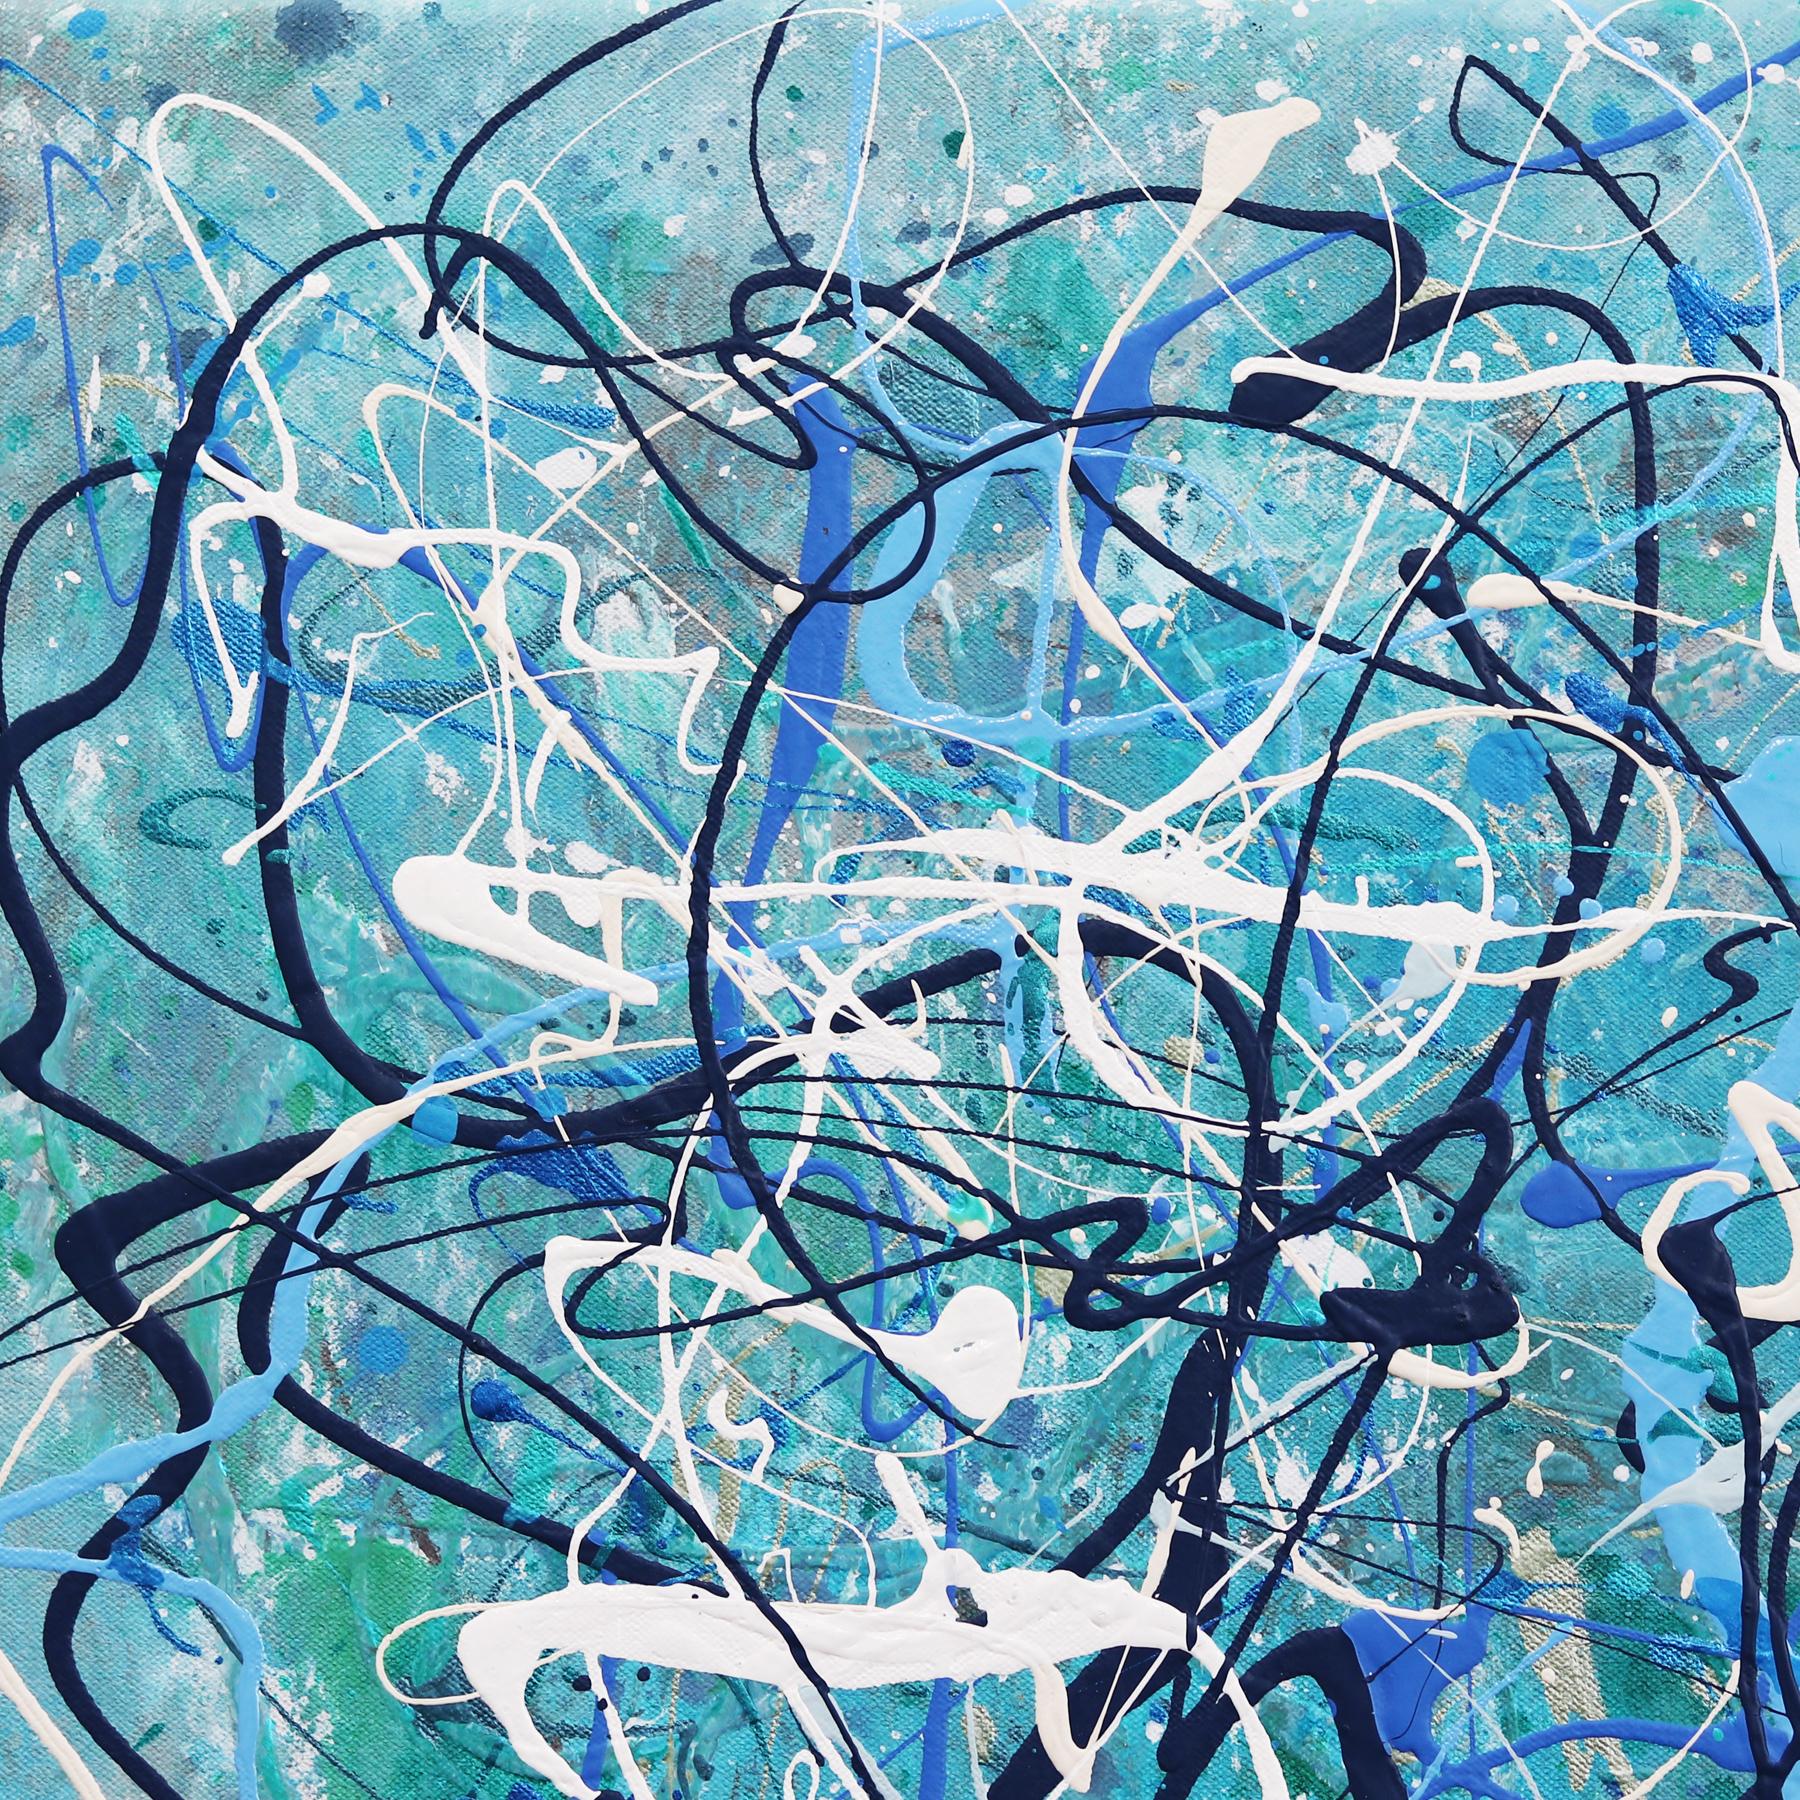 Los Angeles artist Marc Raphael captivates by his abstract expressionism paintings influenced by New York's abstract expressionist movement. After encountering Jackson Pollock’s work for the first time in the 90s, Raphael was enraptured by the